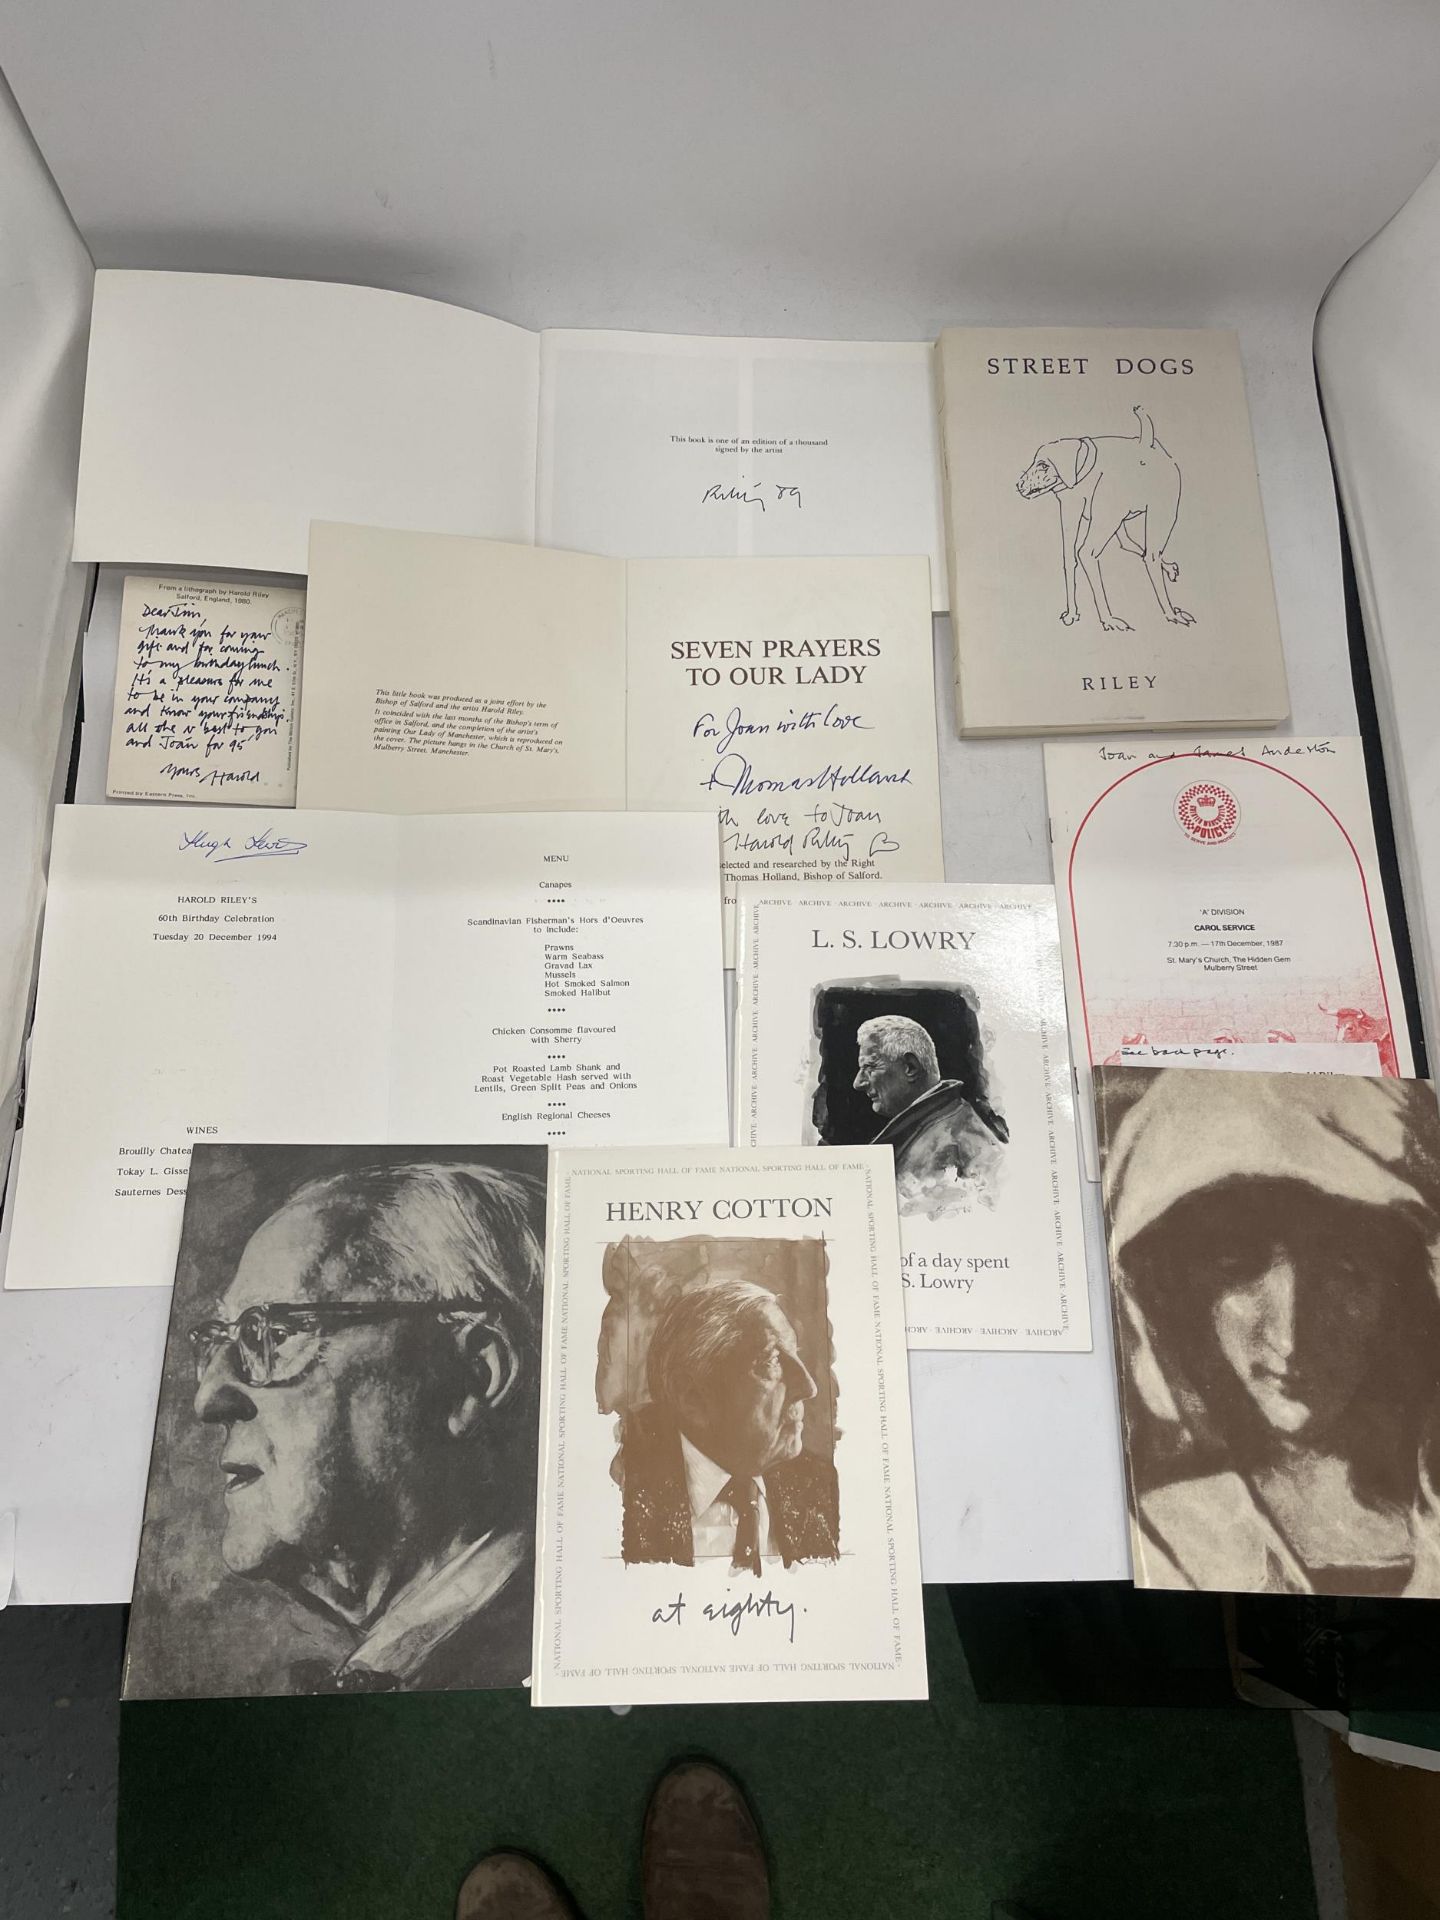 A COLLECTION OF SIGNED ARTISTS EPHEMERA AND BOOKLETS, HAROLD RILEY, L.S LOWRY BOOK, STREET DOGS BOOK